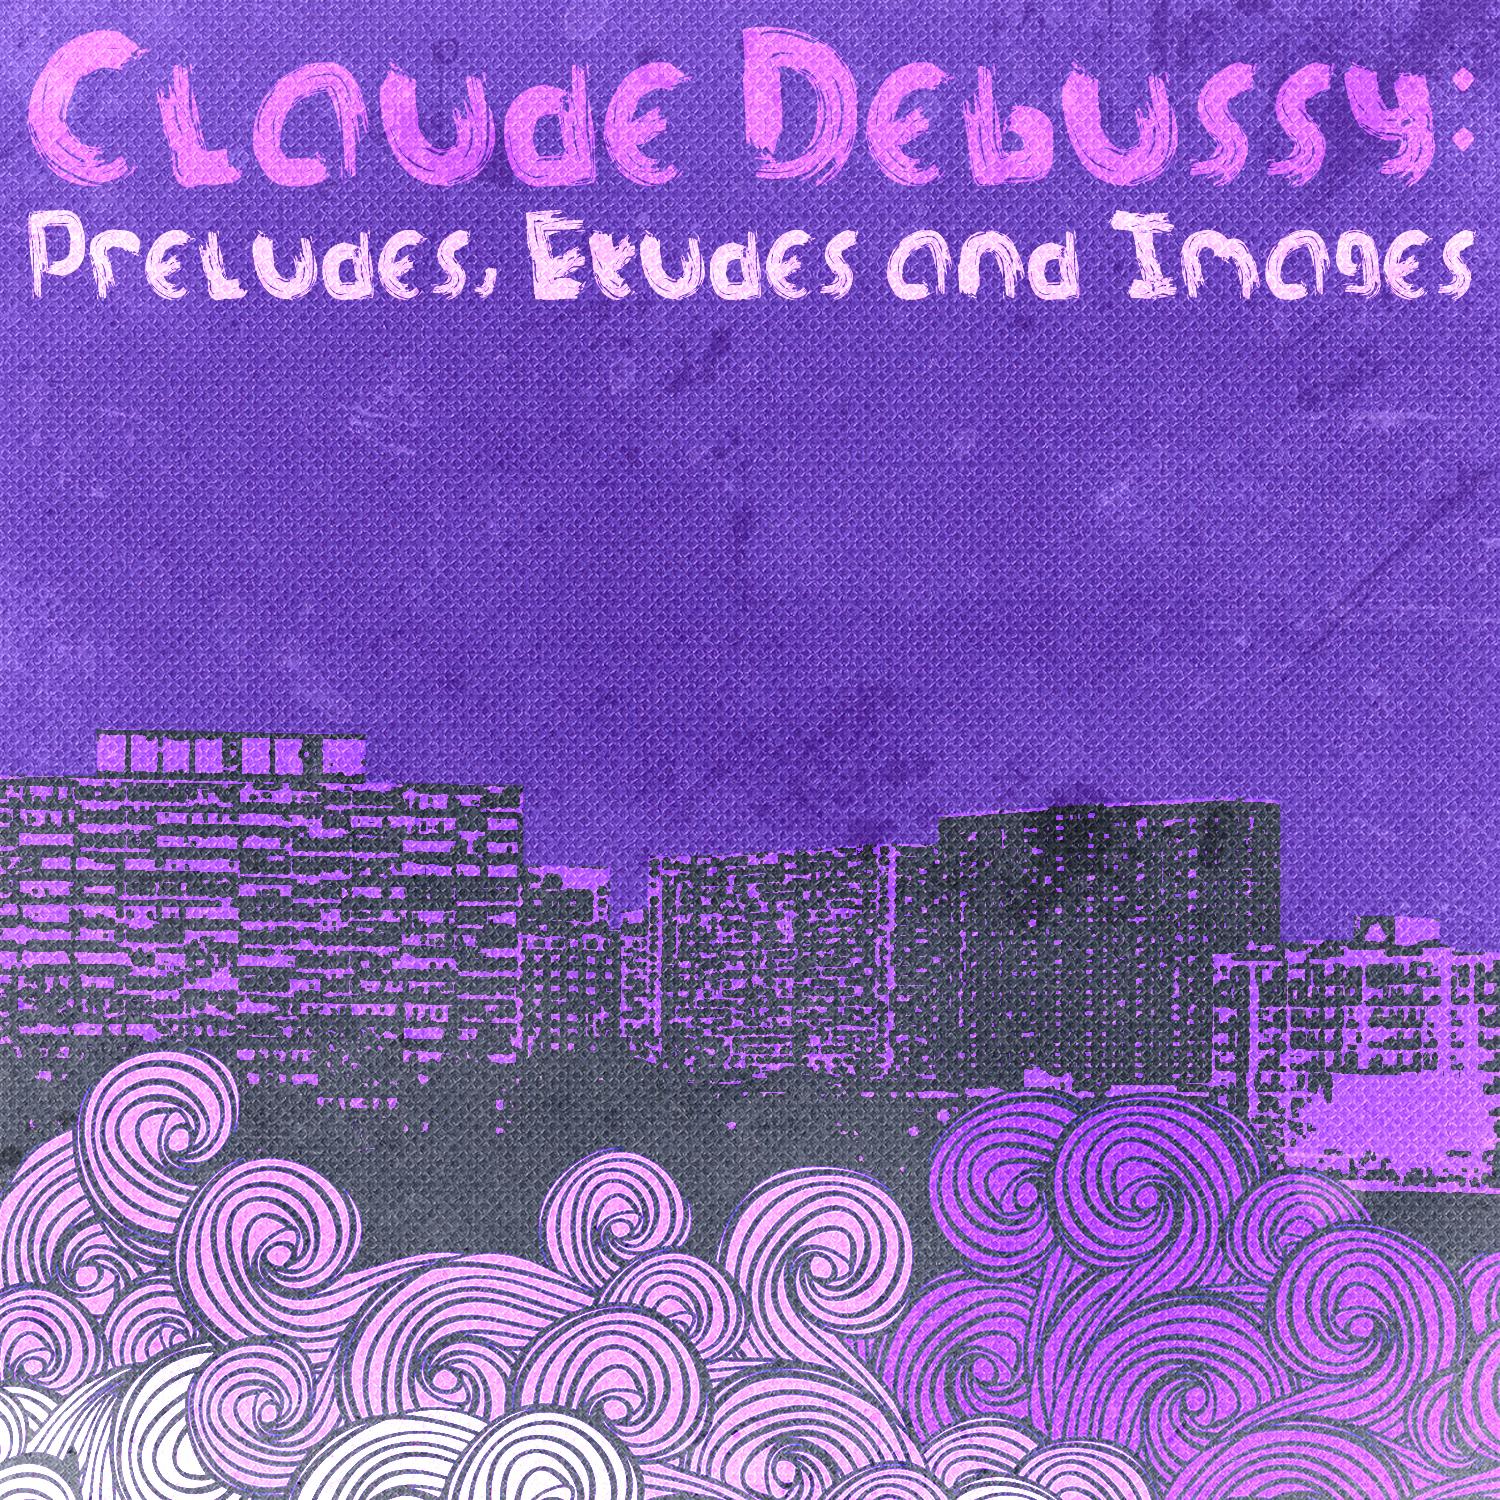 Claude Debussy: Pre ludes, Etudes and Images